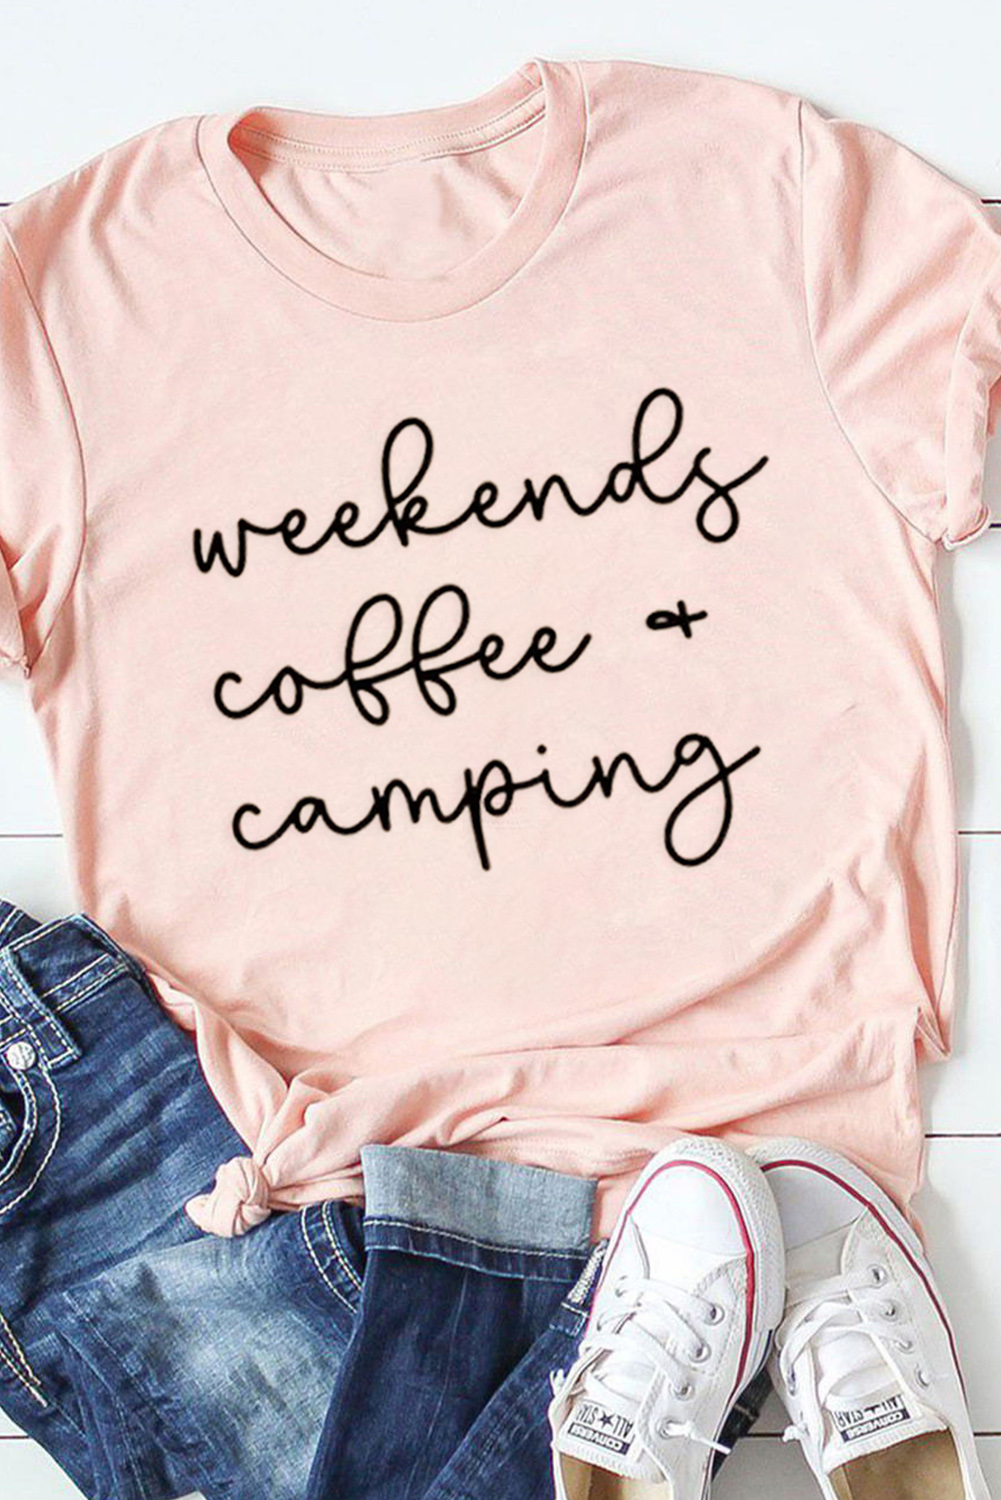 New arrivals 2023 Casual Weekends COFFEE Camping Letter Printed Pink Graphic Tee